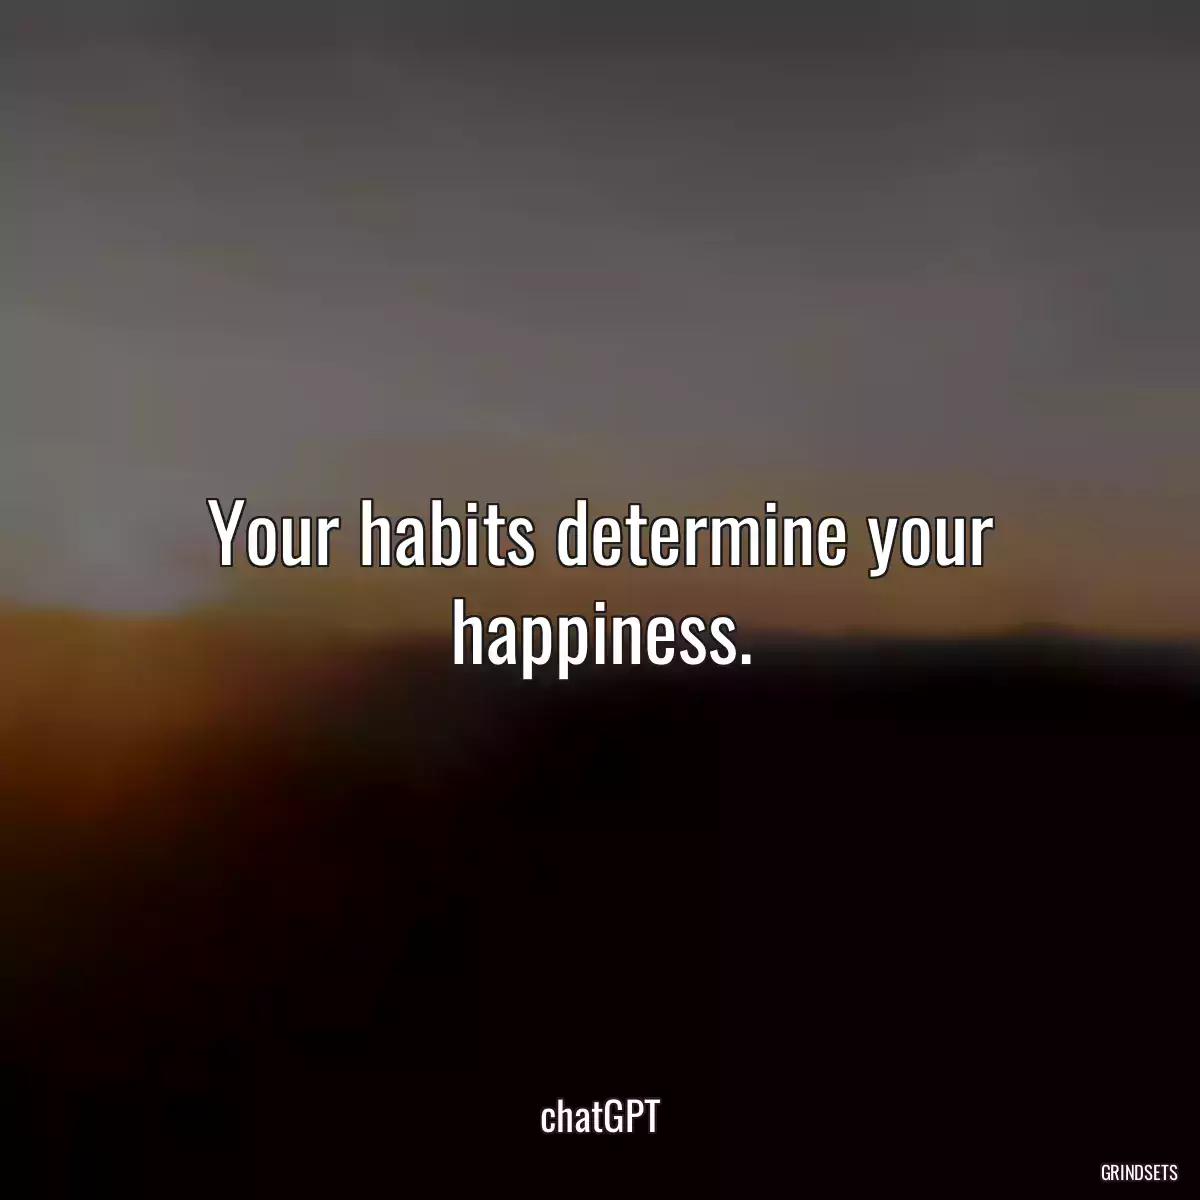 Your habits determine your happiness.